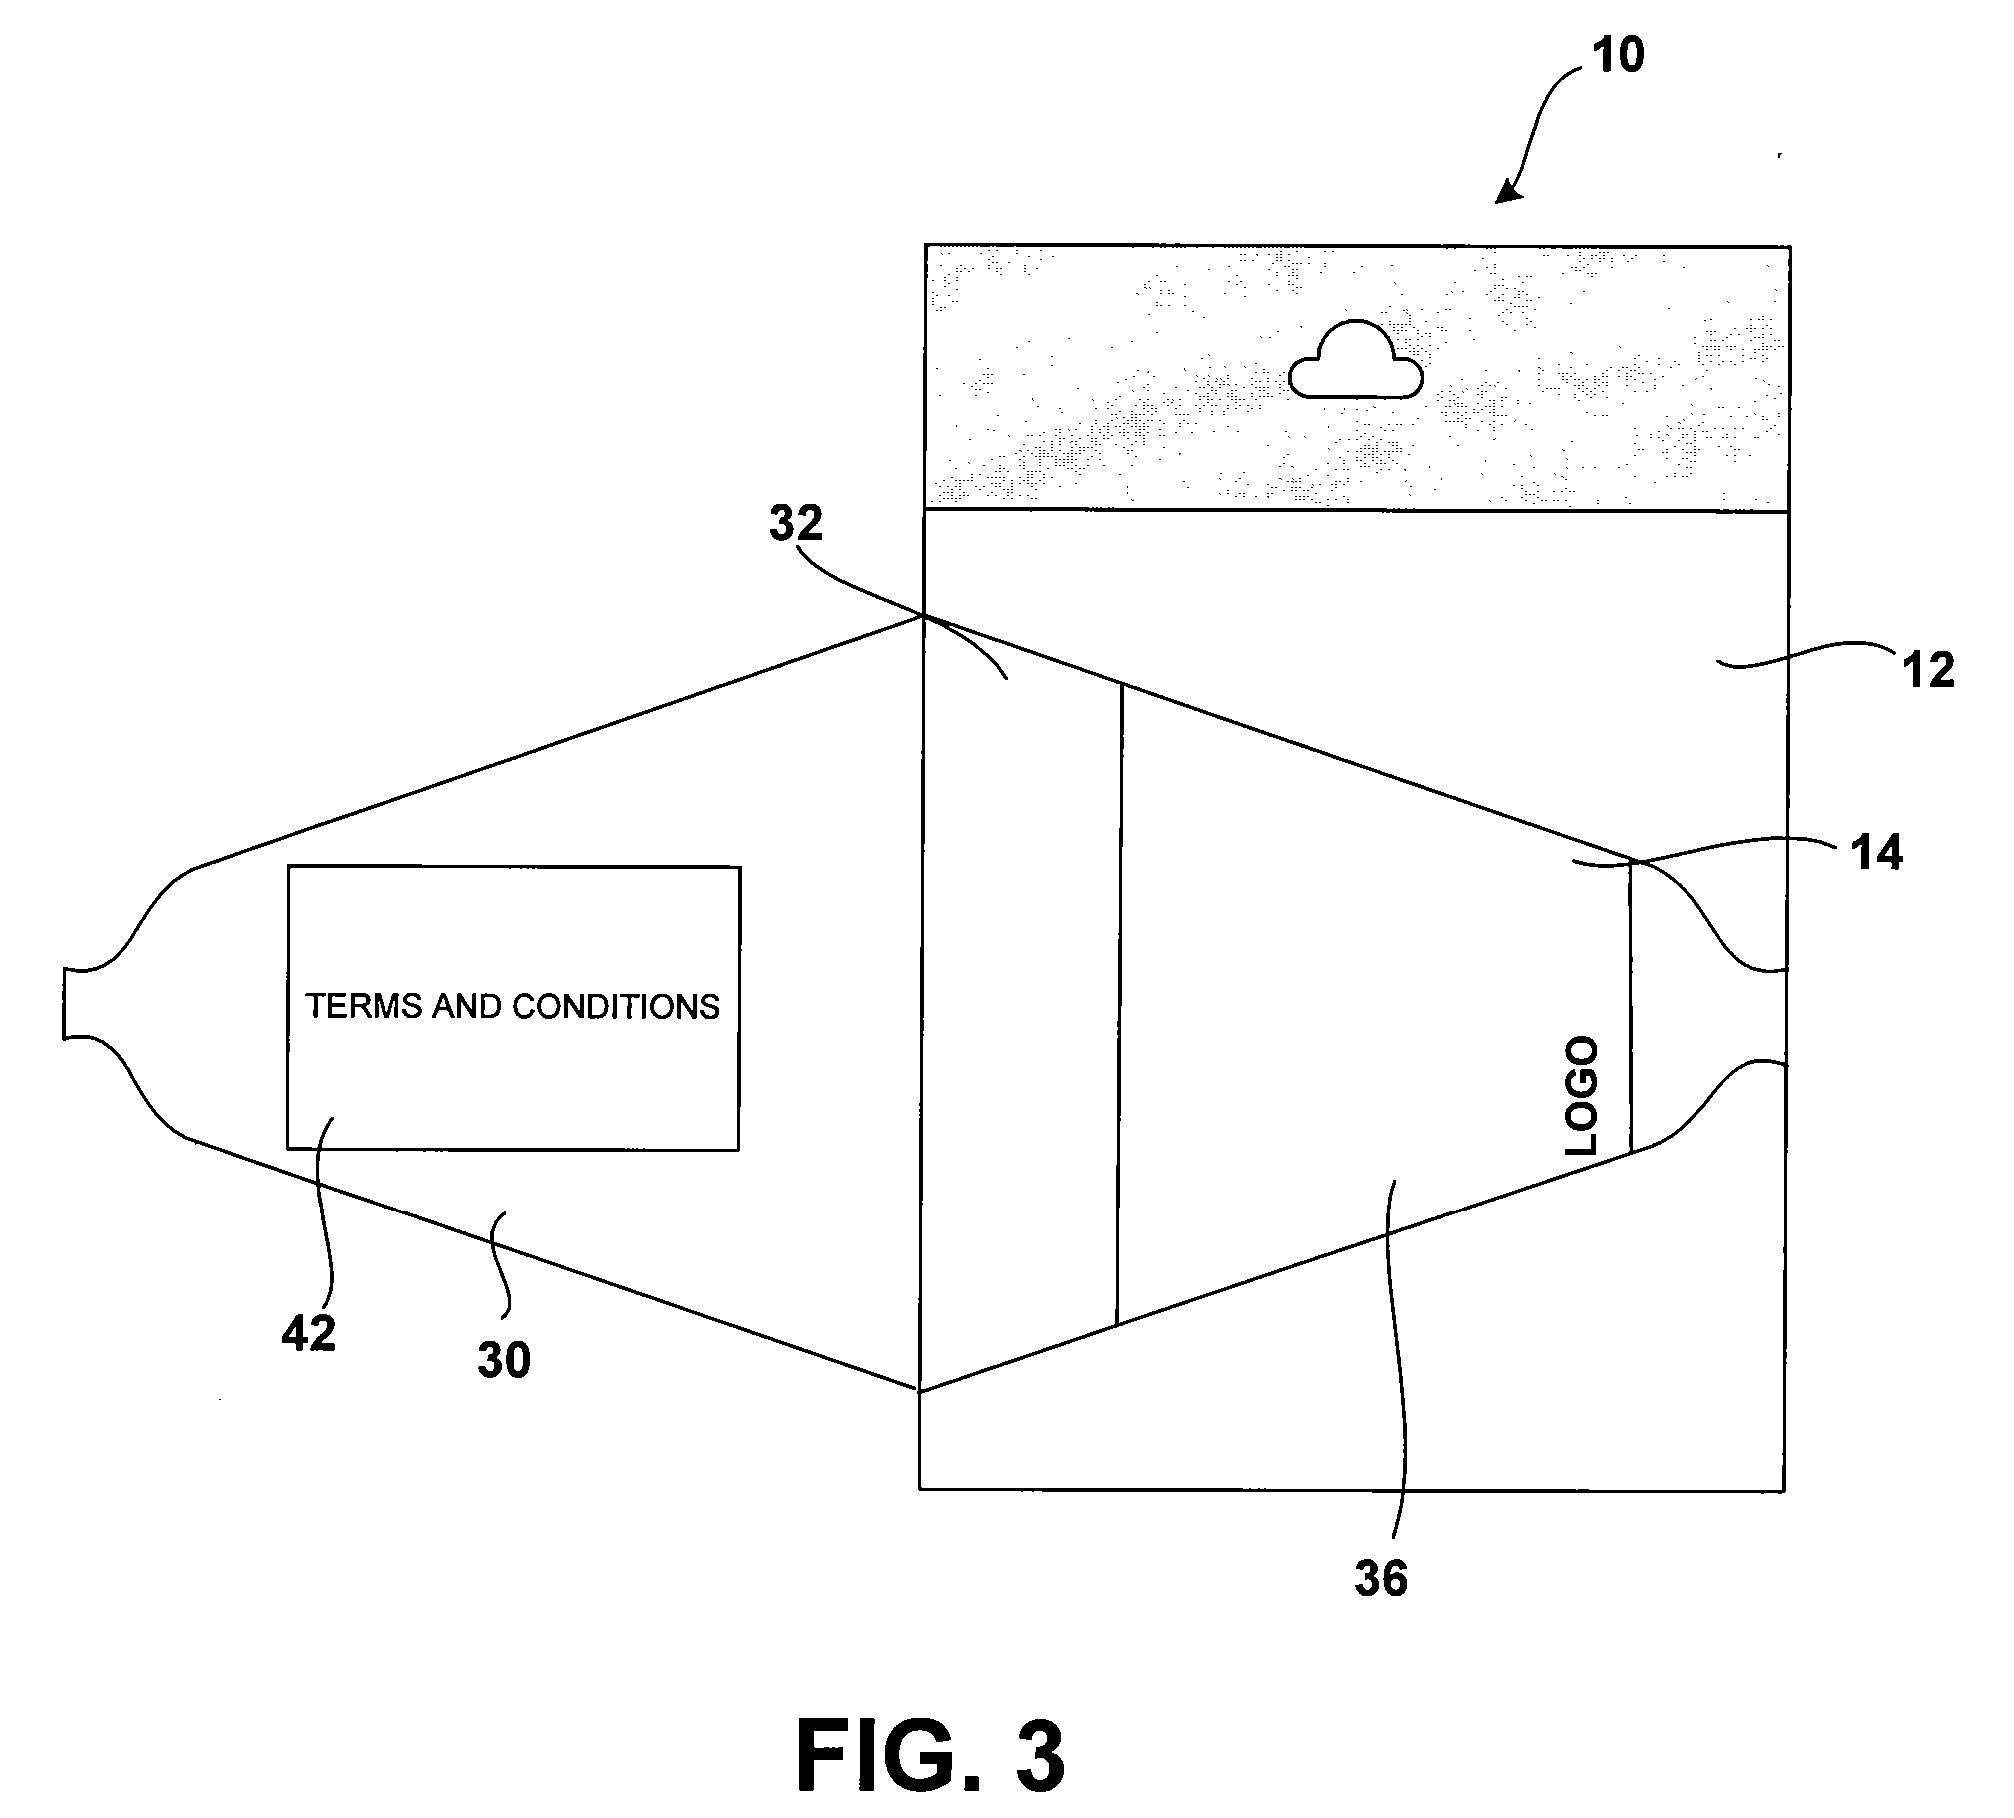 Presentation instrument with user-created pin and methods for activating